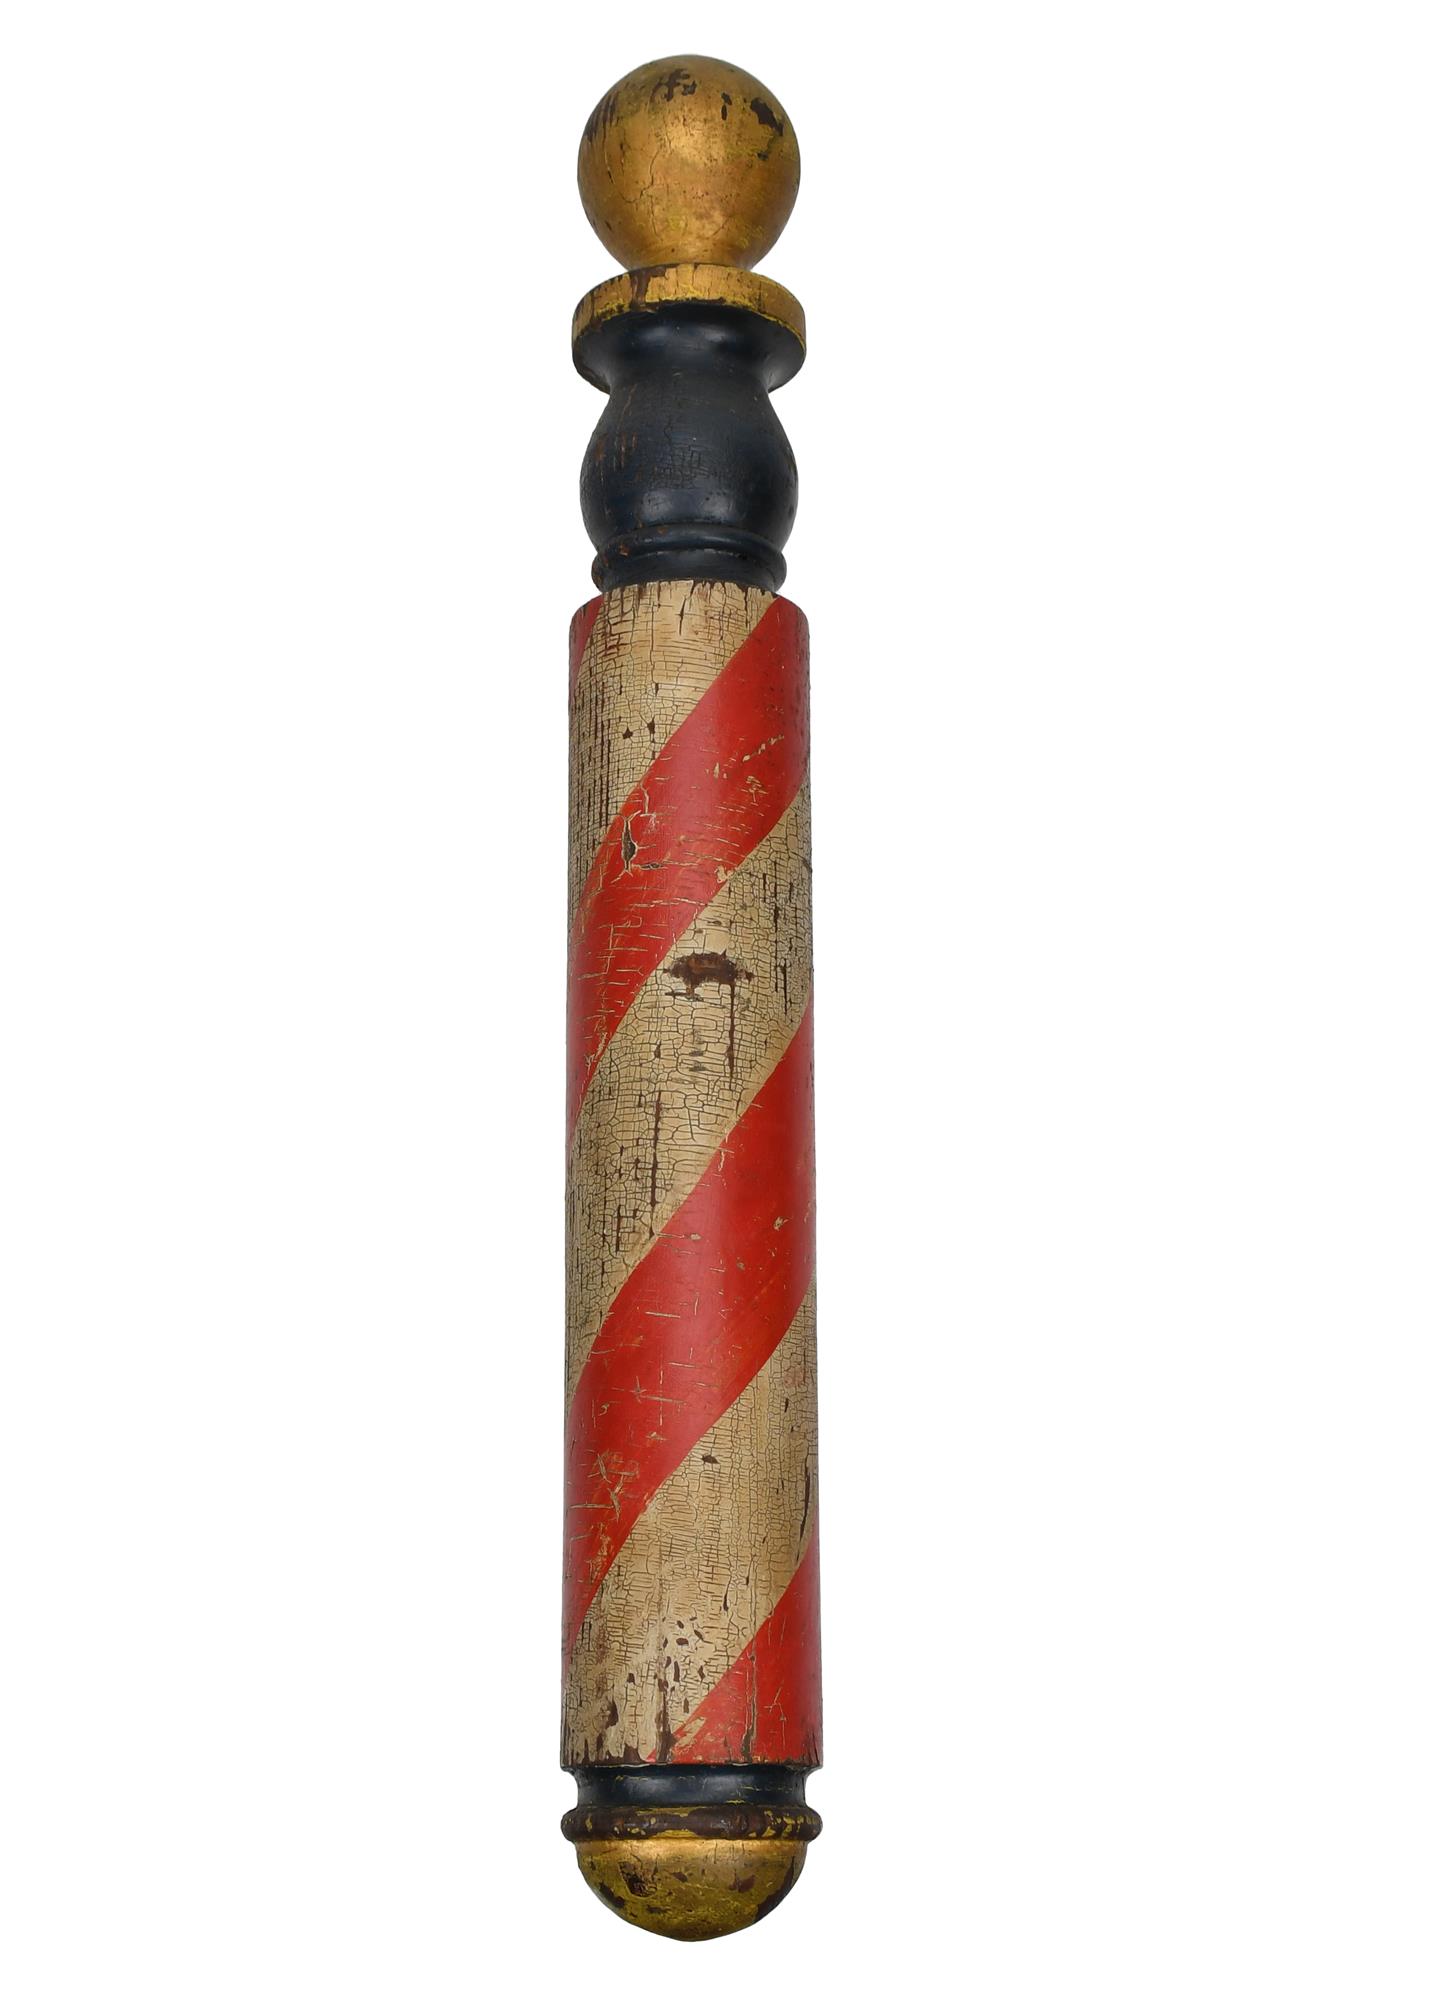 EARLY 20TH C. BARBER POLE A wall